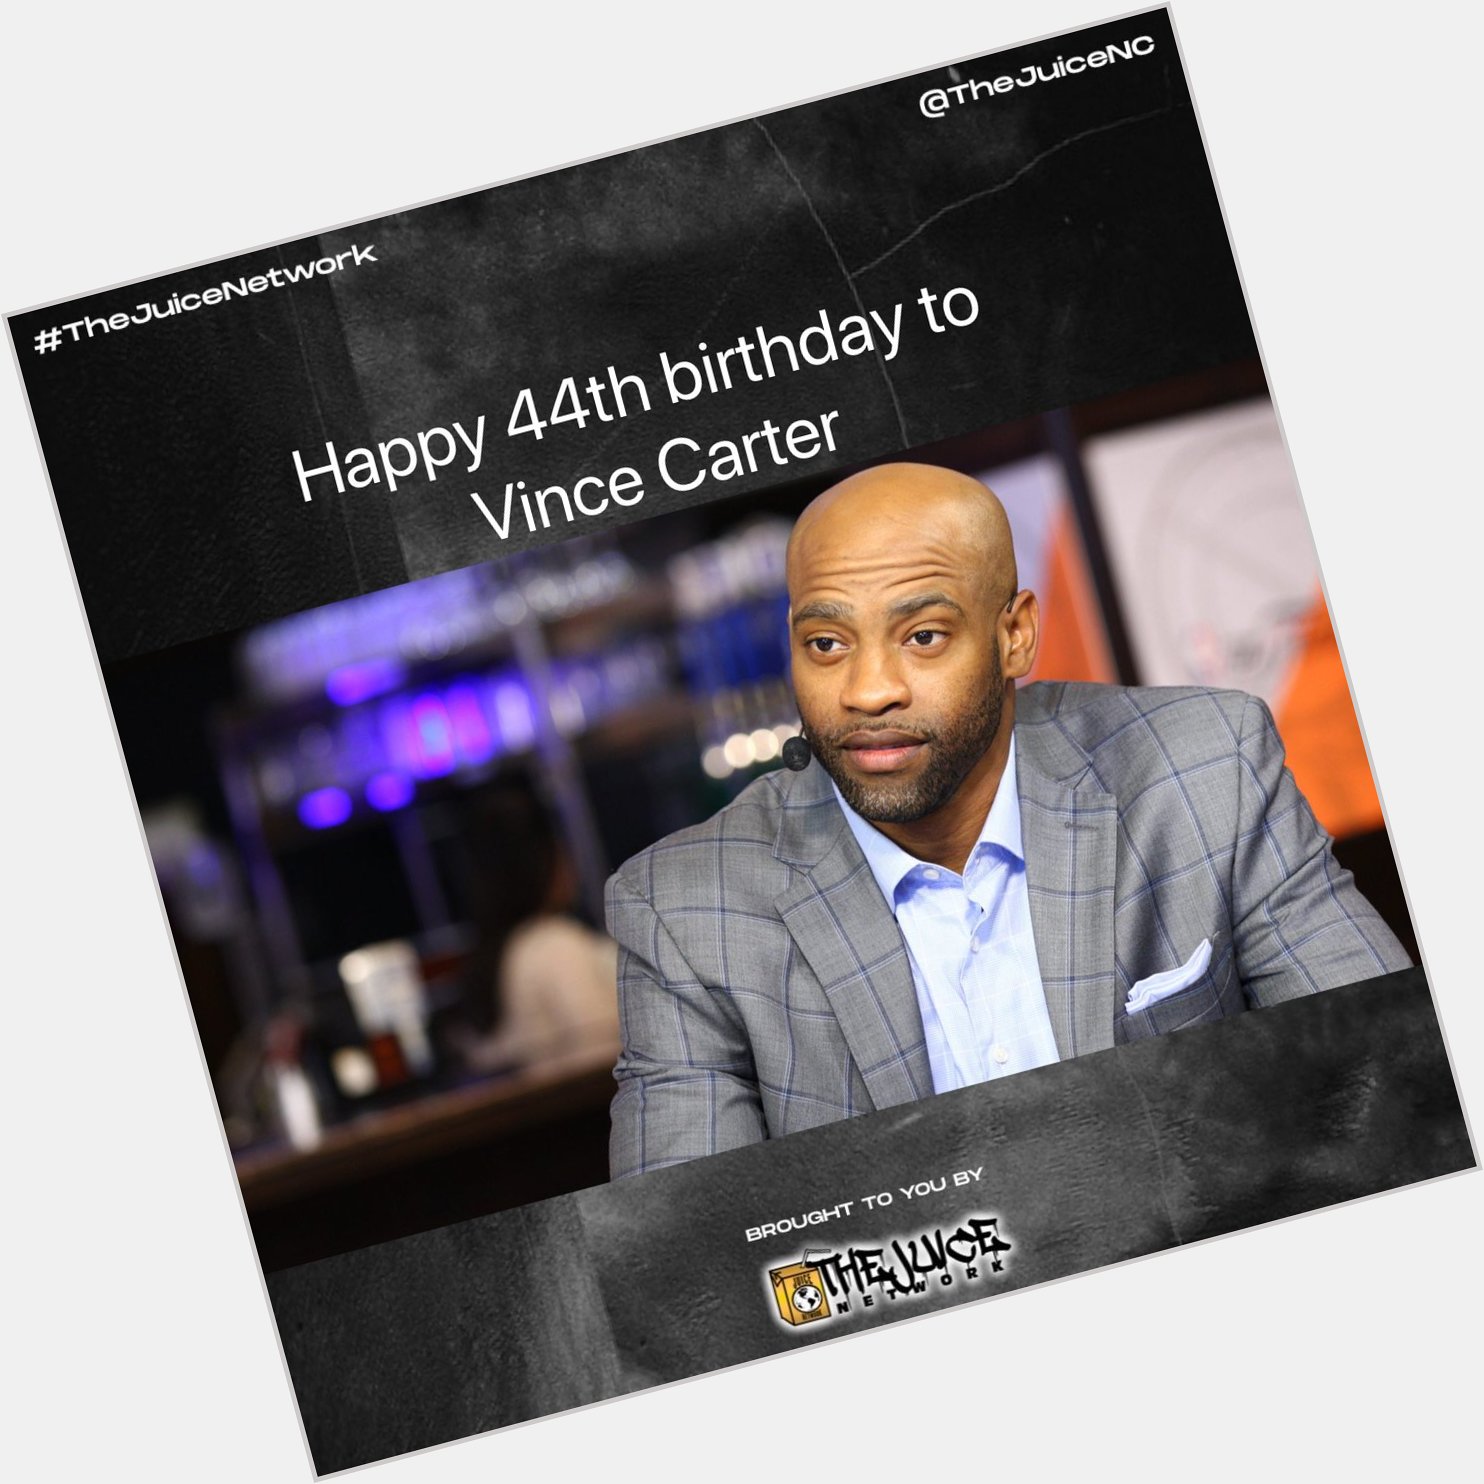  wishes everyone a HAPPY BIRTHDAY! Today we celebrate 

Vince Carter - 44 